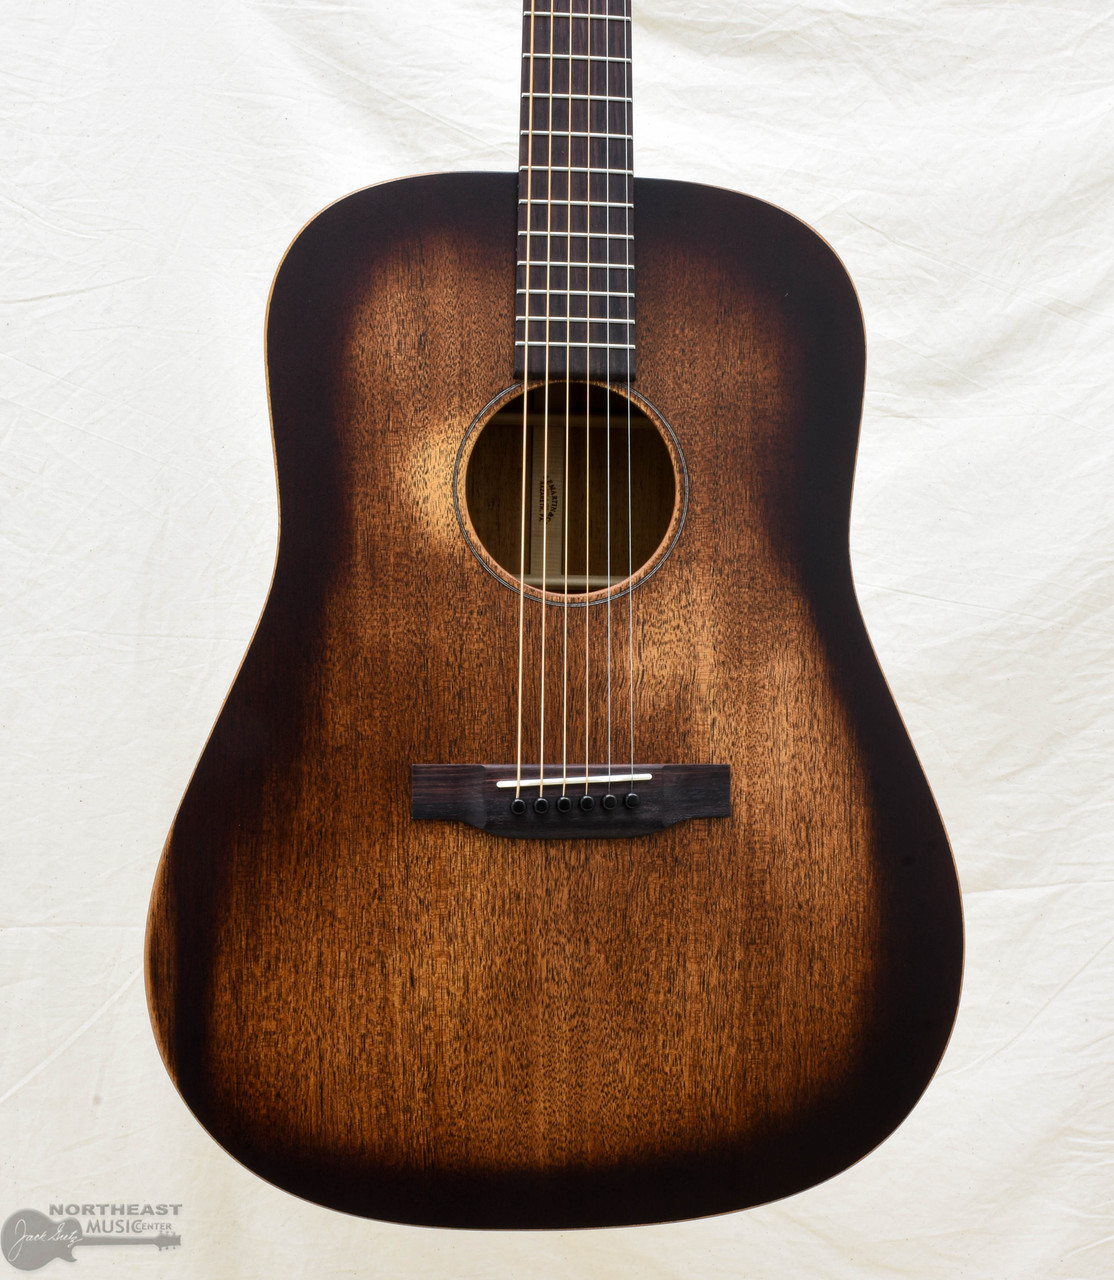 C.F. Martin D-15 Streetmaster Acoustic Guitar (s/n: 0225